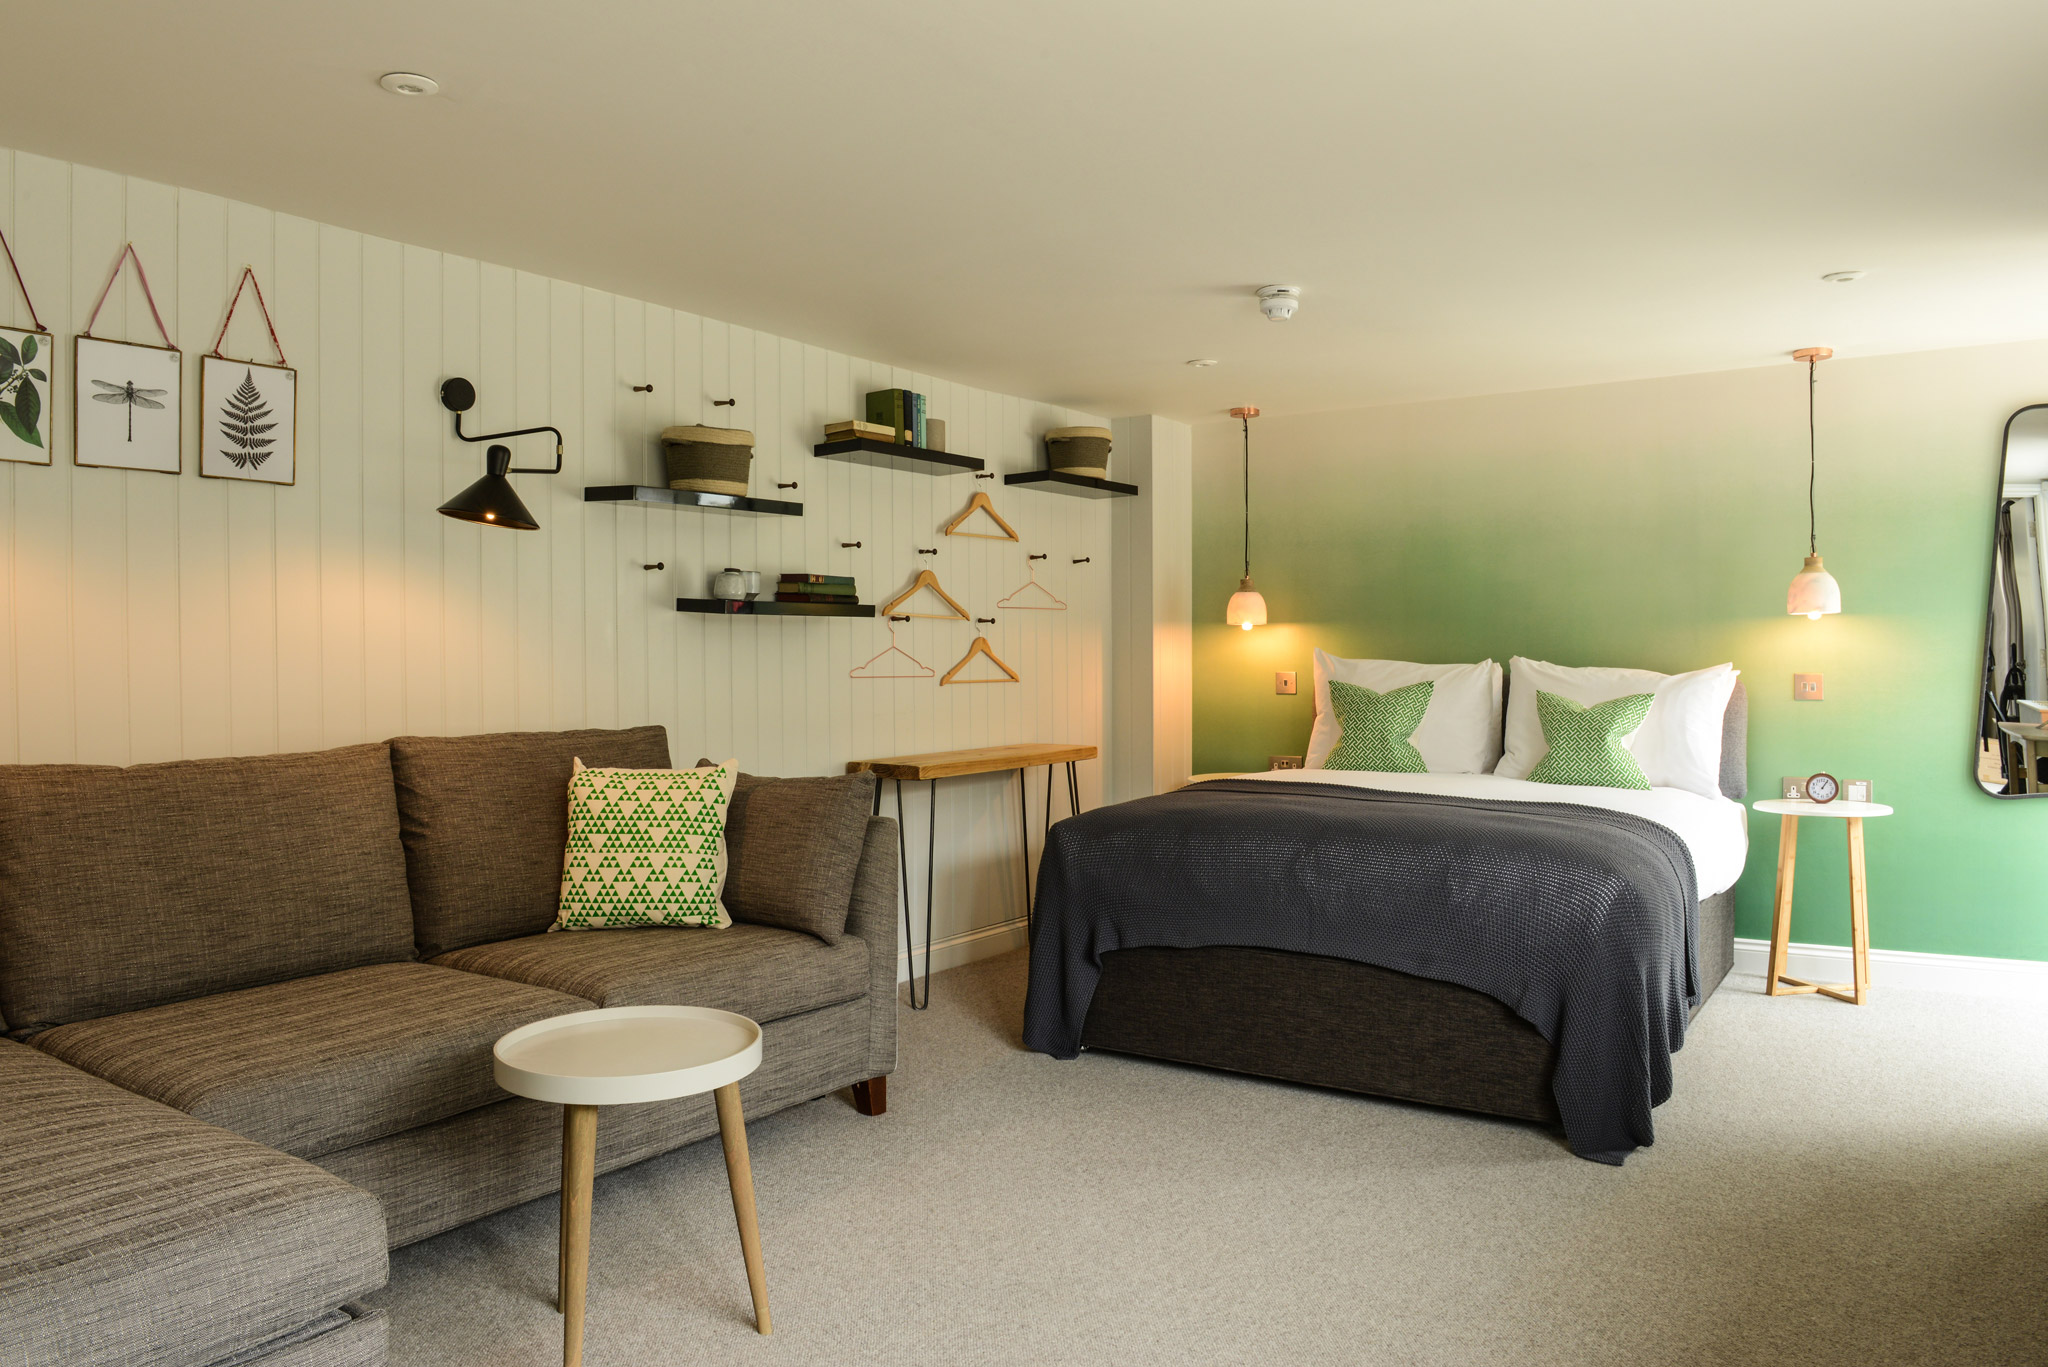 Stay in Oatfields, a kingsize room at The Litton. Green blended wallpaper with quirky art on the walls.